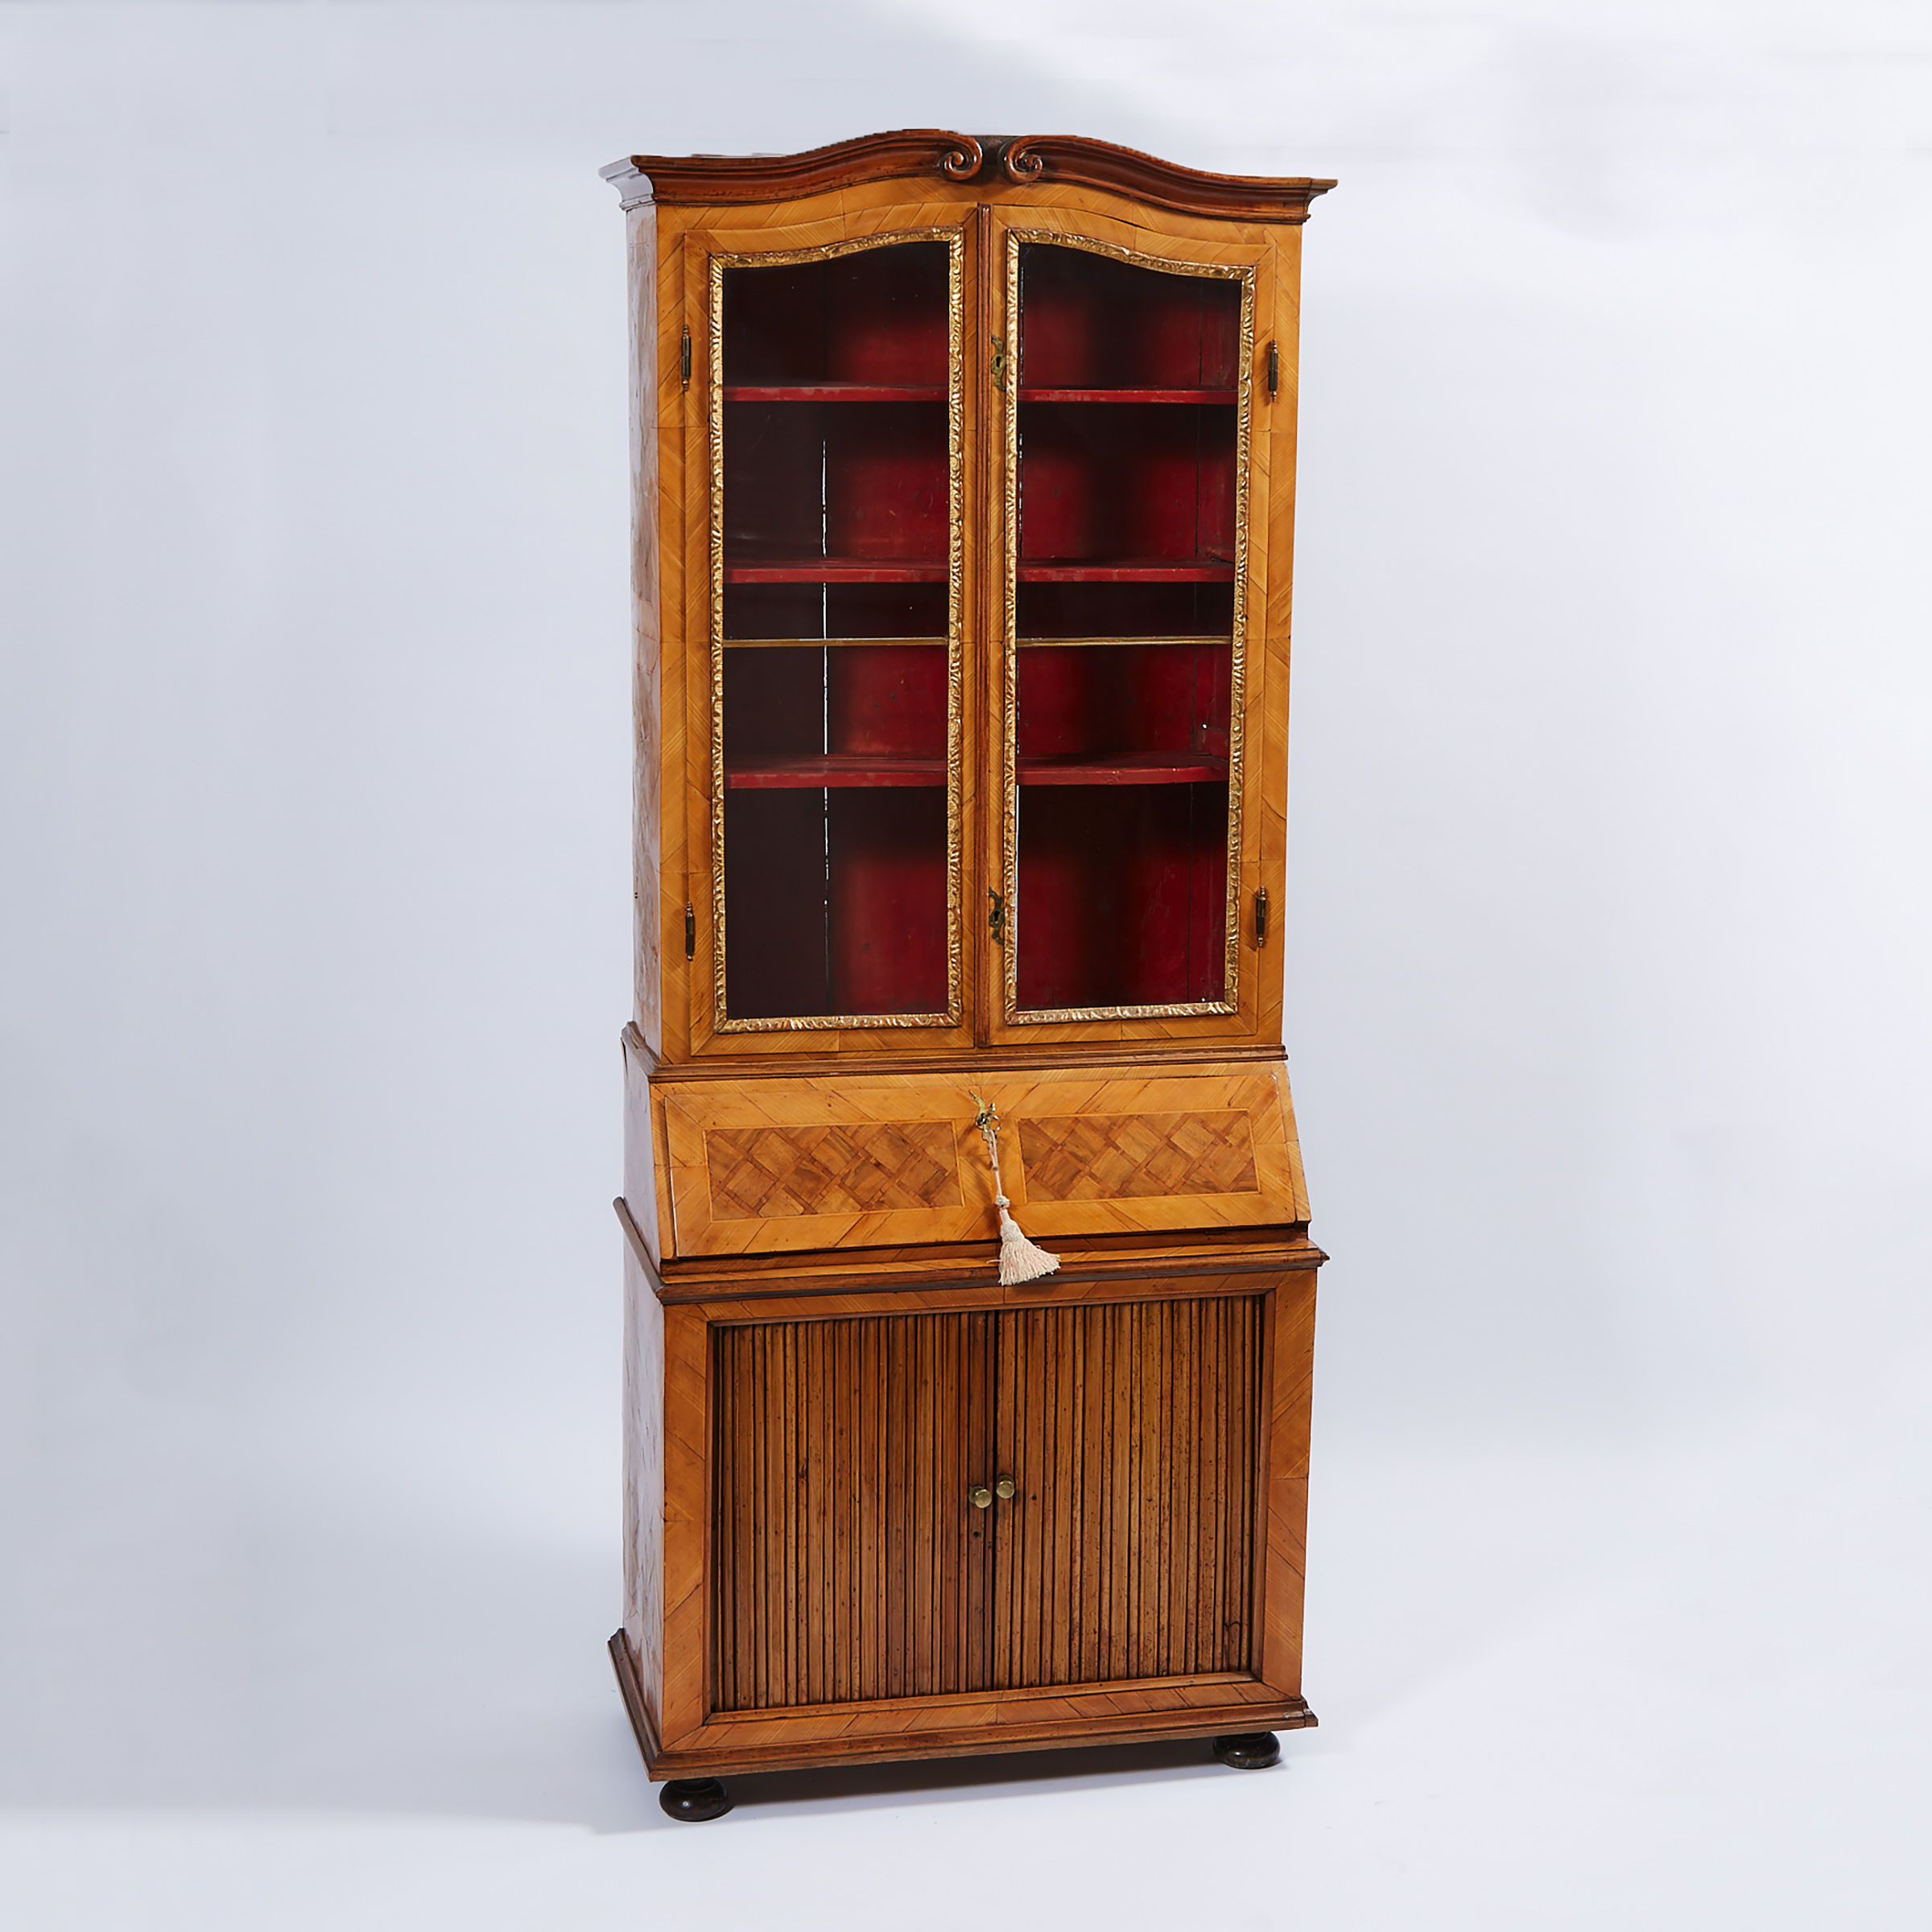 Austrian Parquetry Secretaire Bookcase, early 19th century